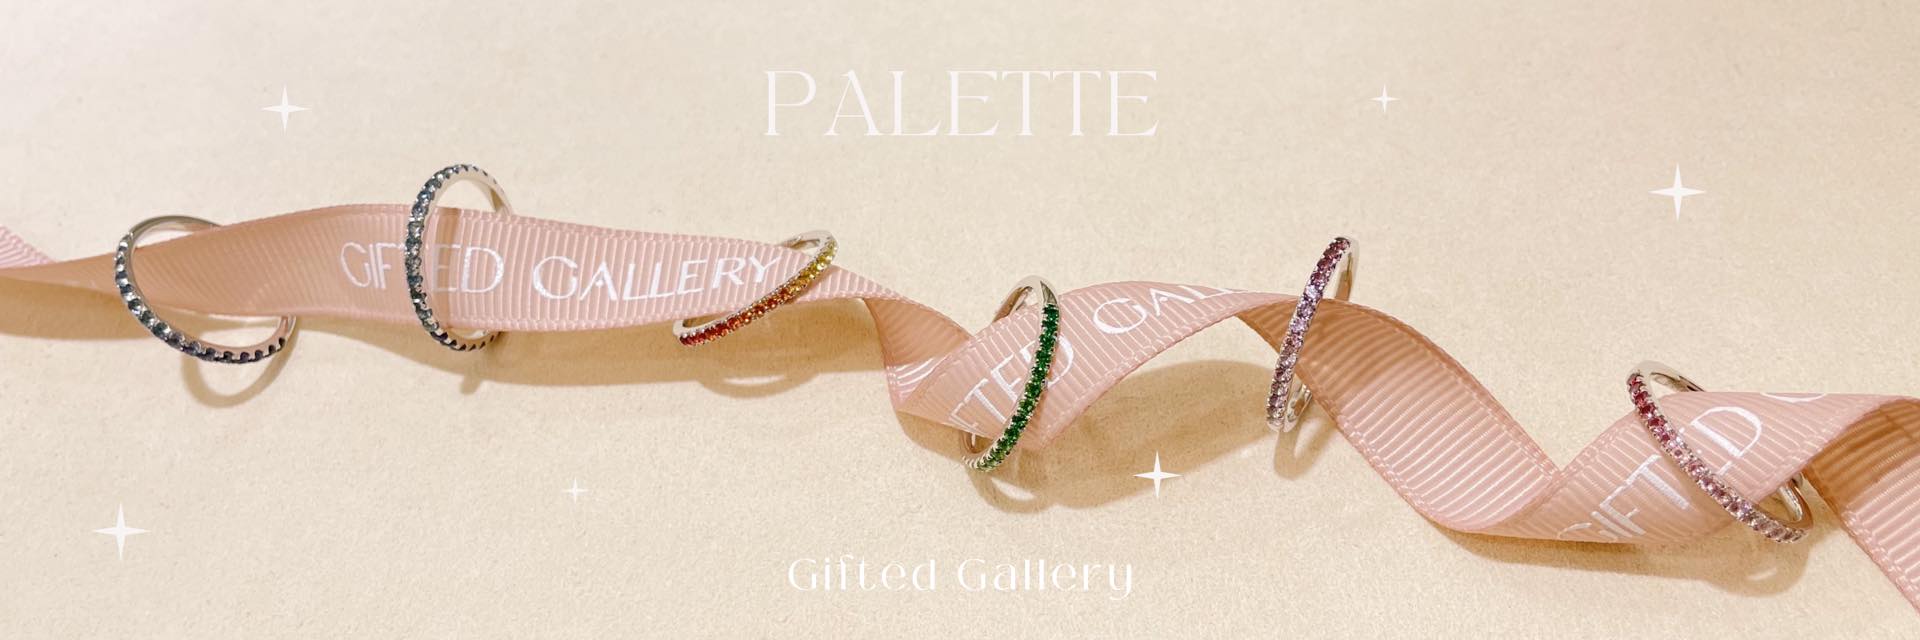 Palette Ring by Gifted Gallery